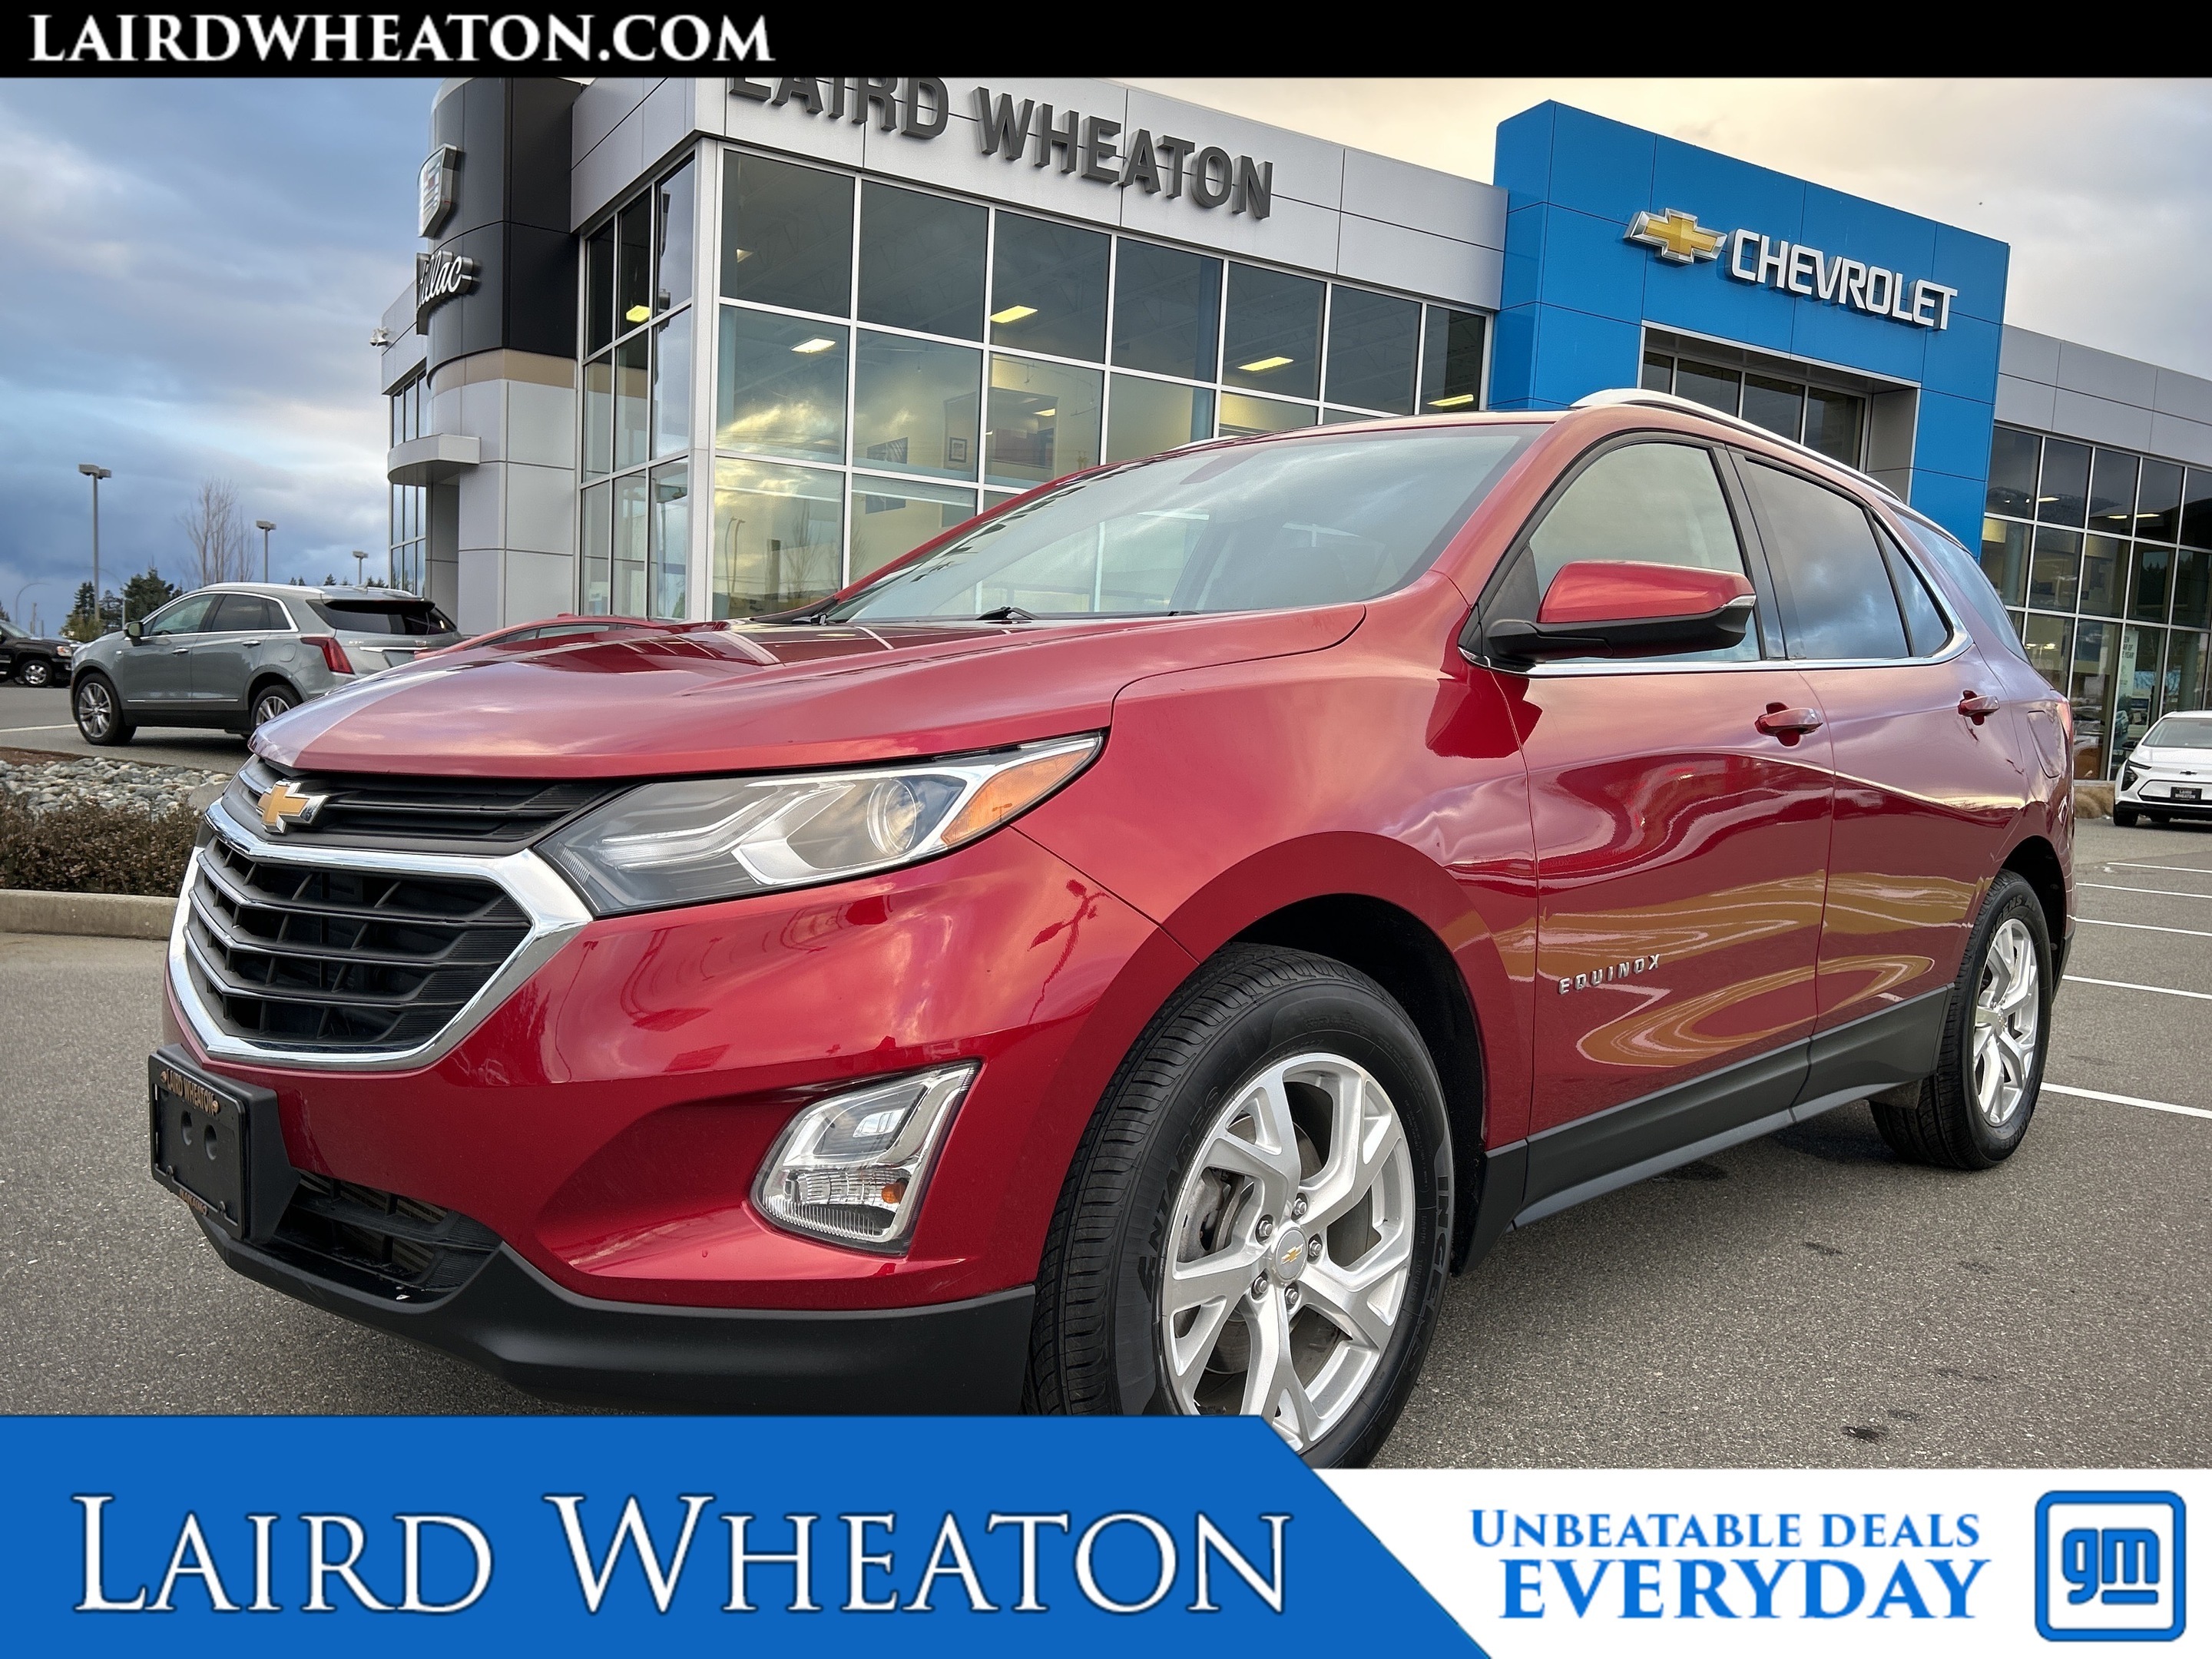 2019 Chevrolet Equinox LT AWD, Power Group, Great Safety Features